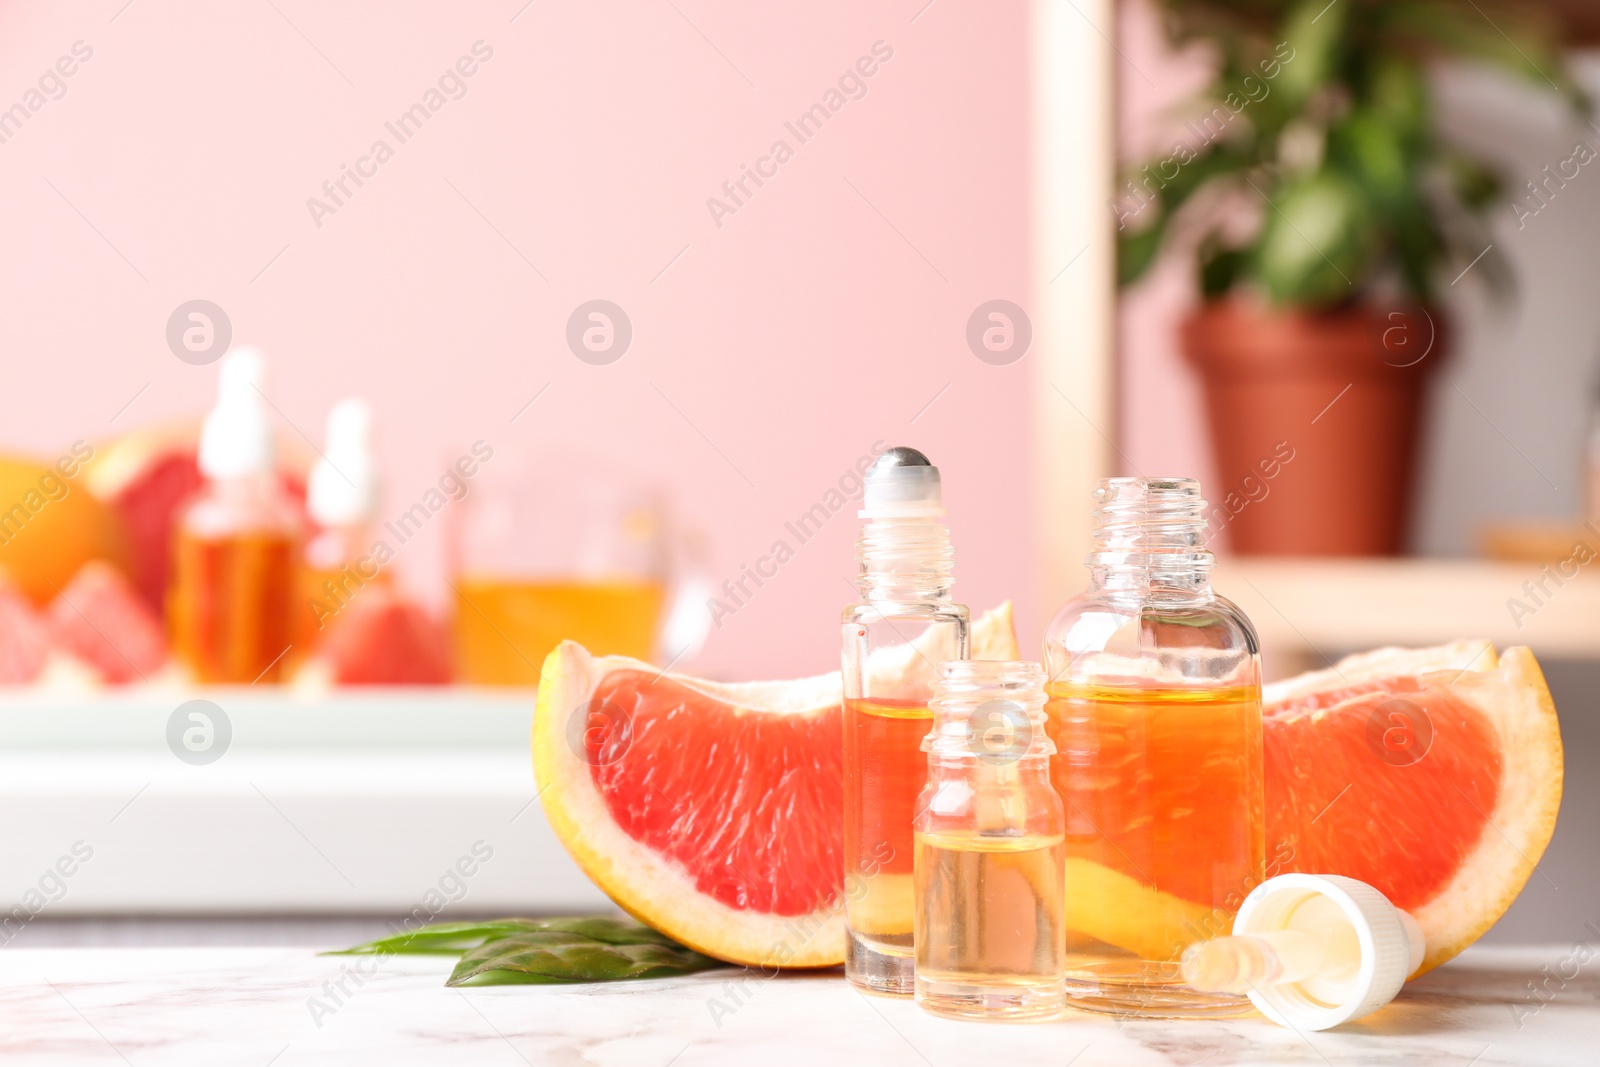 Photo of Bottles of essential oil and grapefruit slices on table against blurred background. Space for text